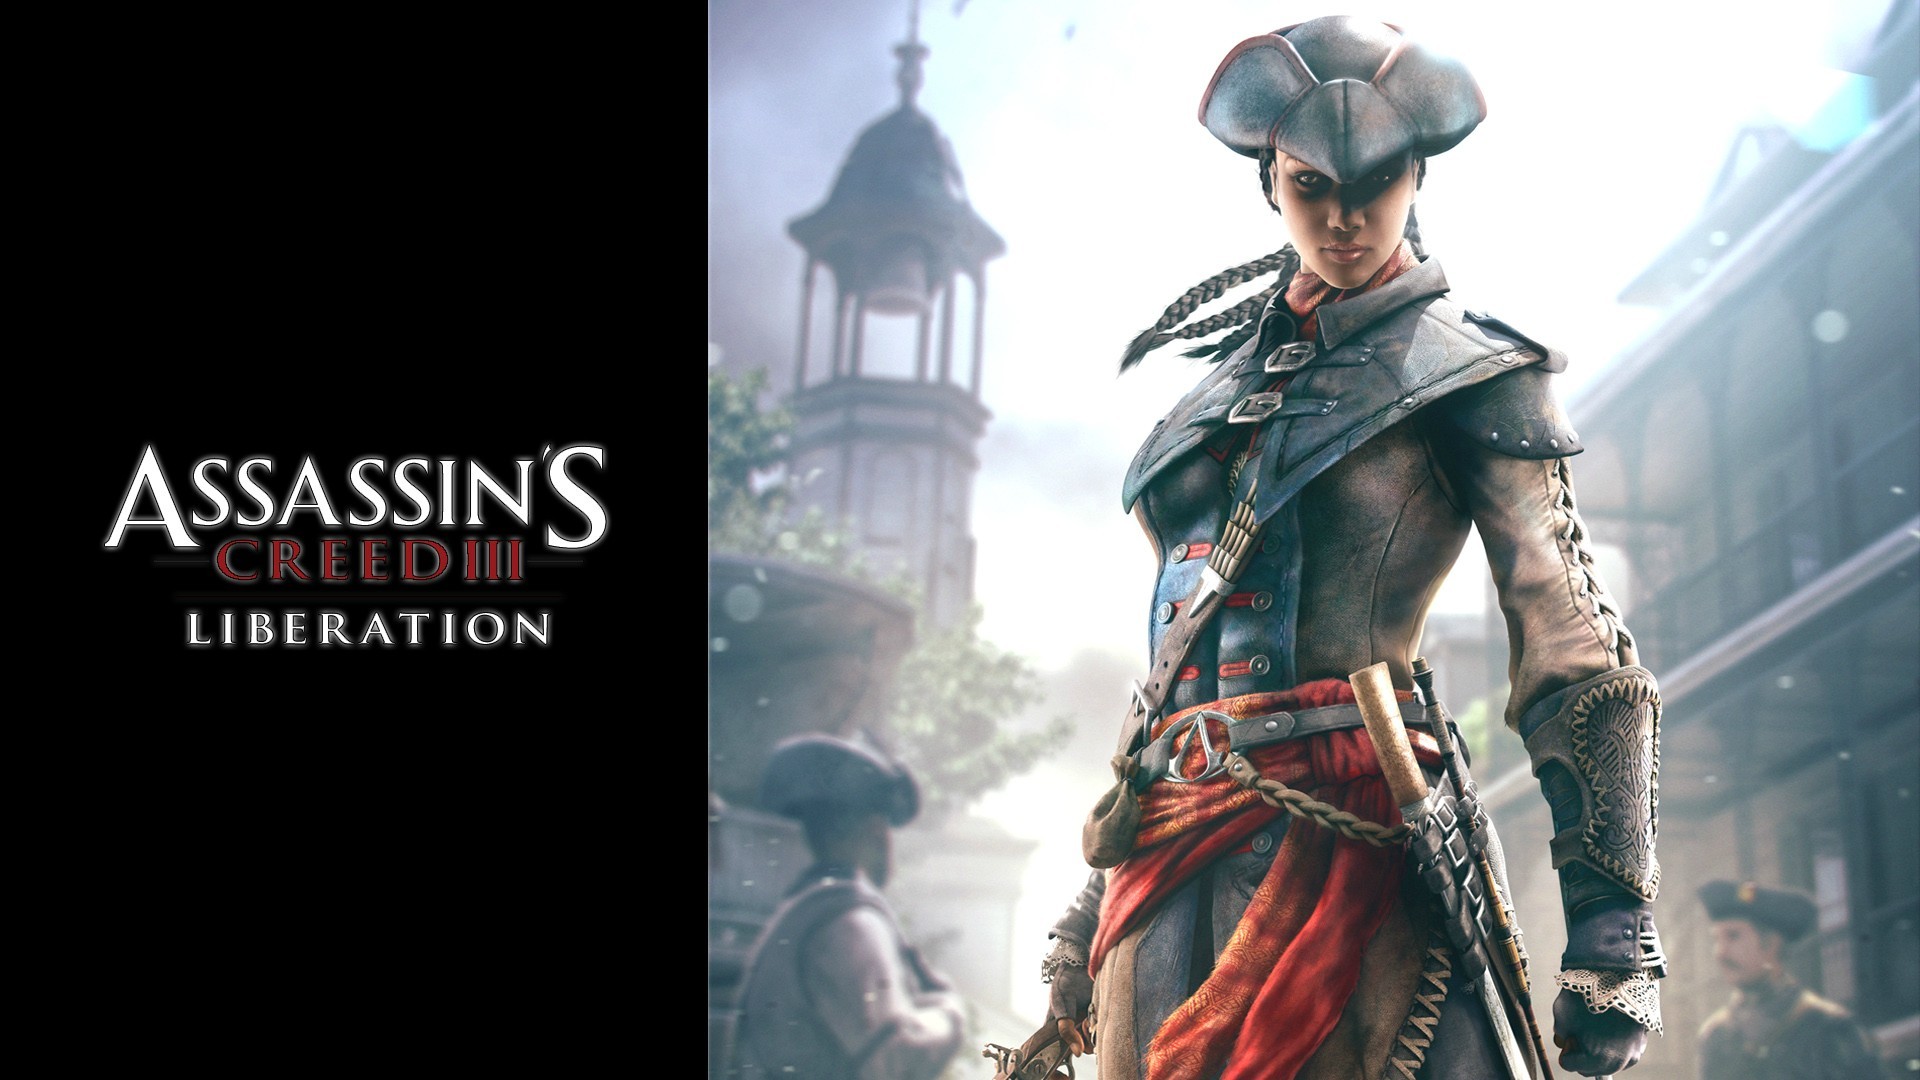 Assassin's Creed III: Liberation – 2 New Wallpapers